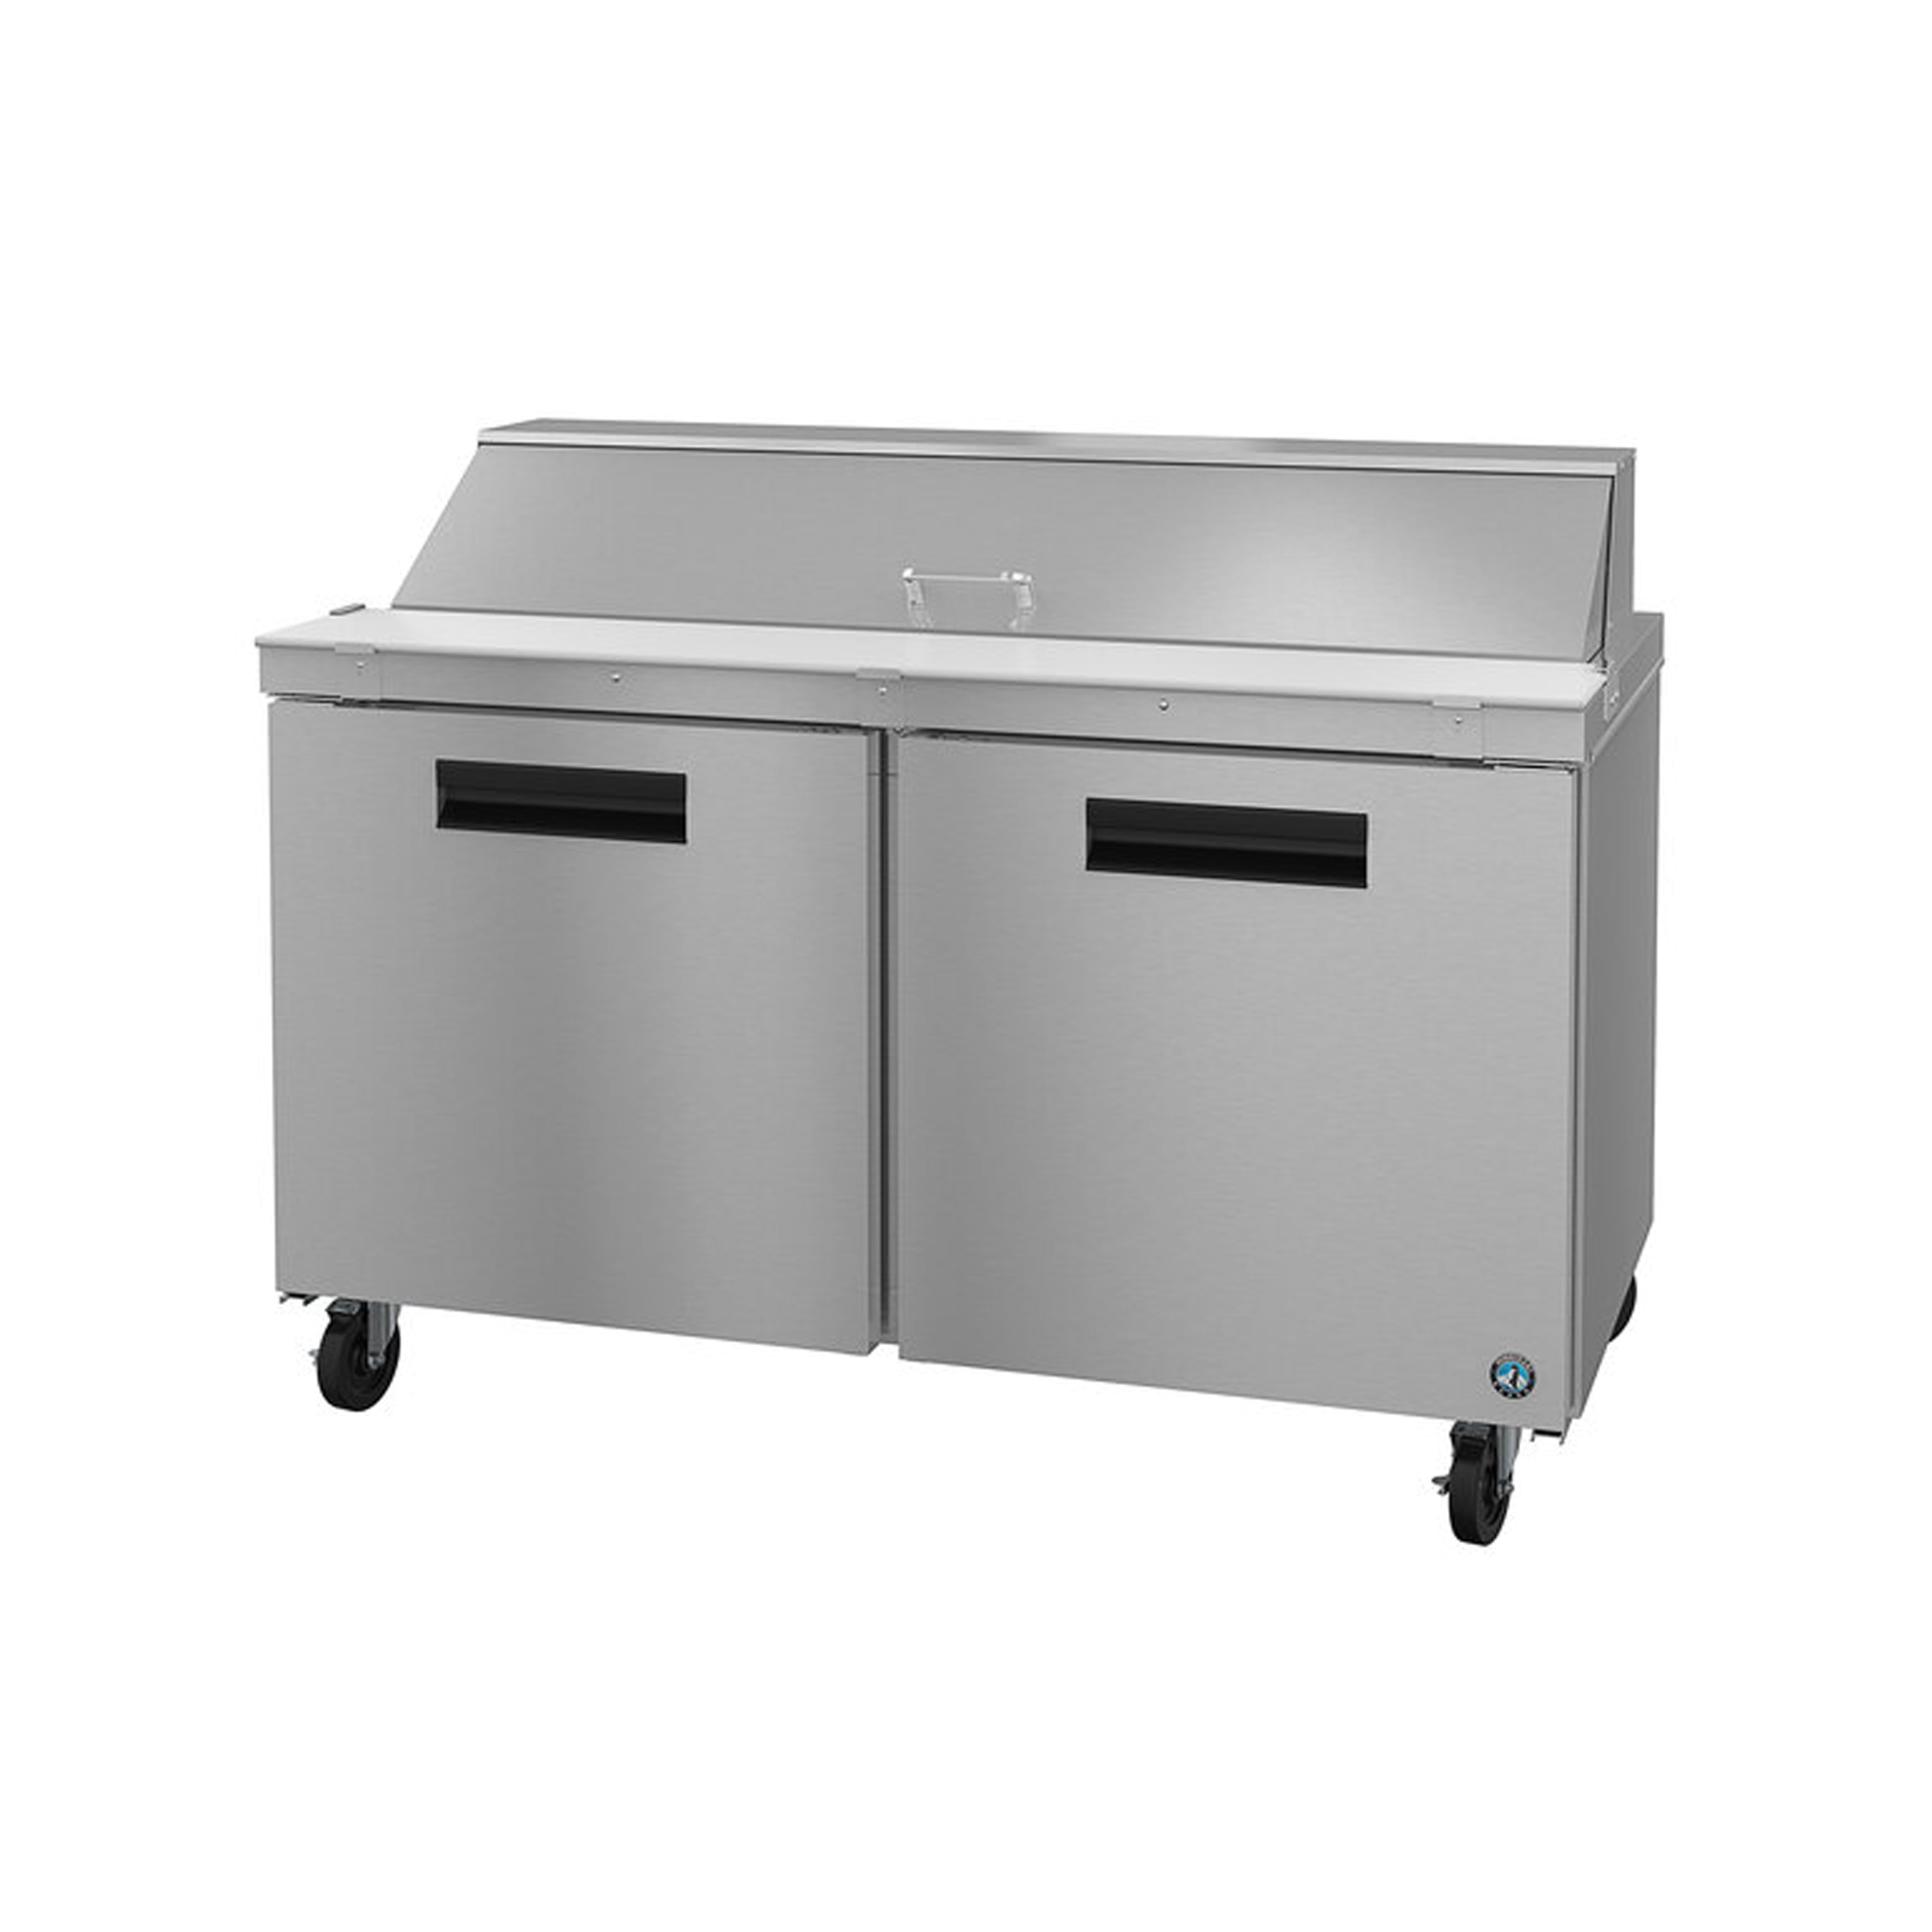 Hoshizaki - SR60B-16, Commercial 60" Two Section Sandwich Prep Table Refrigerator Stainless Doors